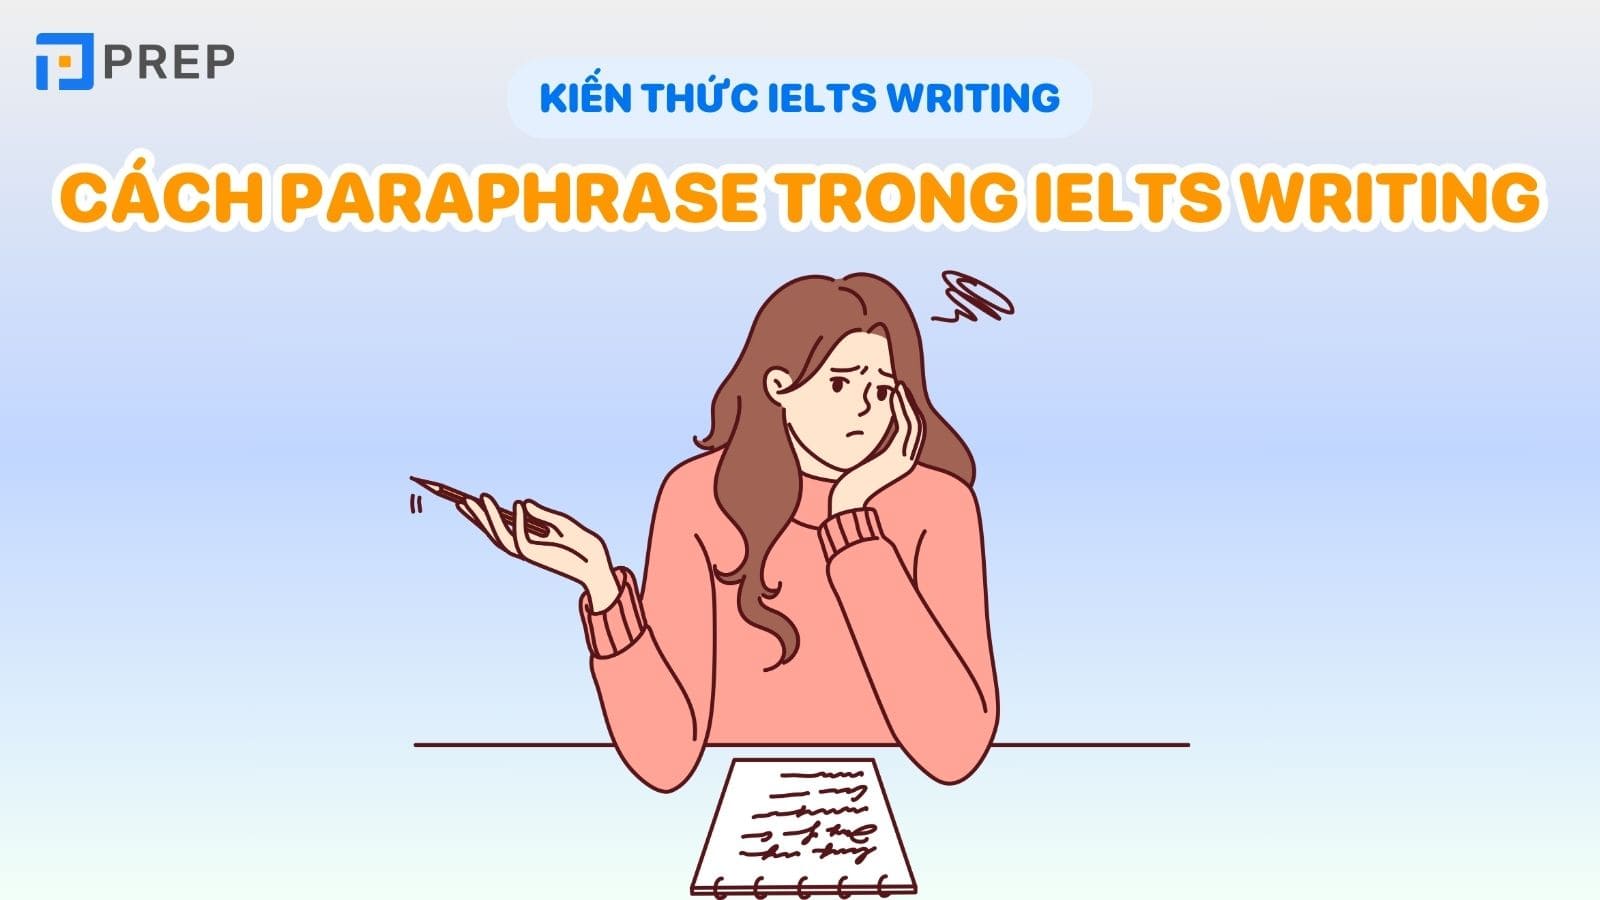 cach-paraphrase-trong-ielts-writing.jpg